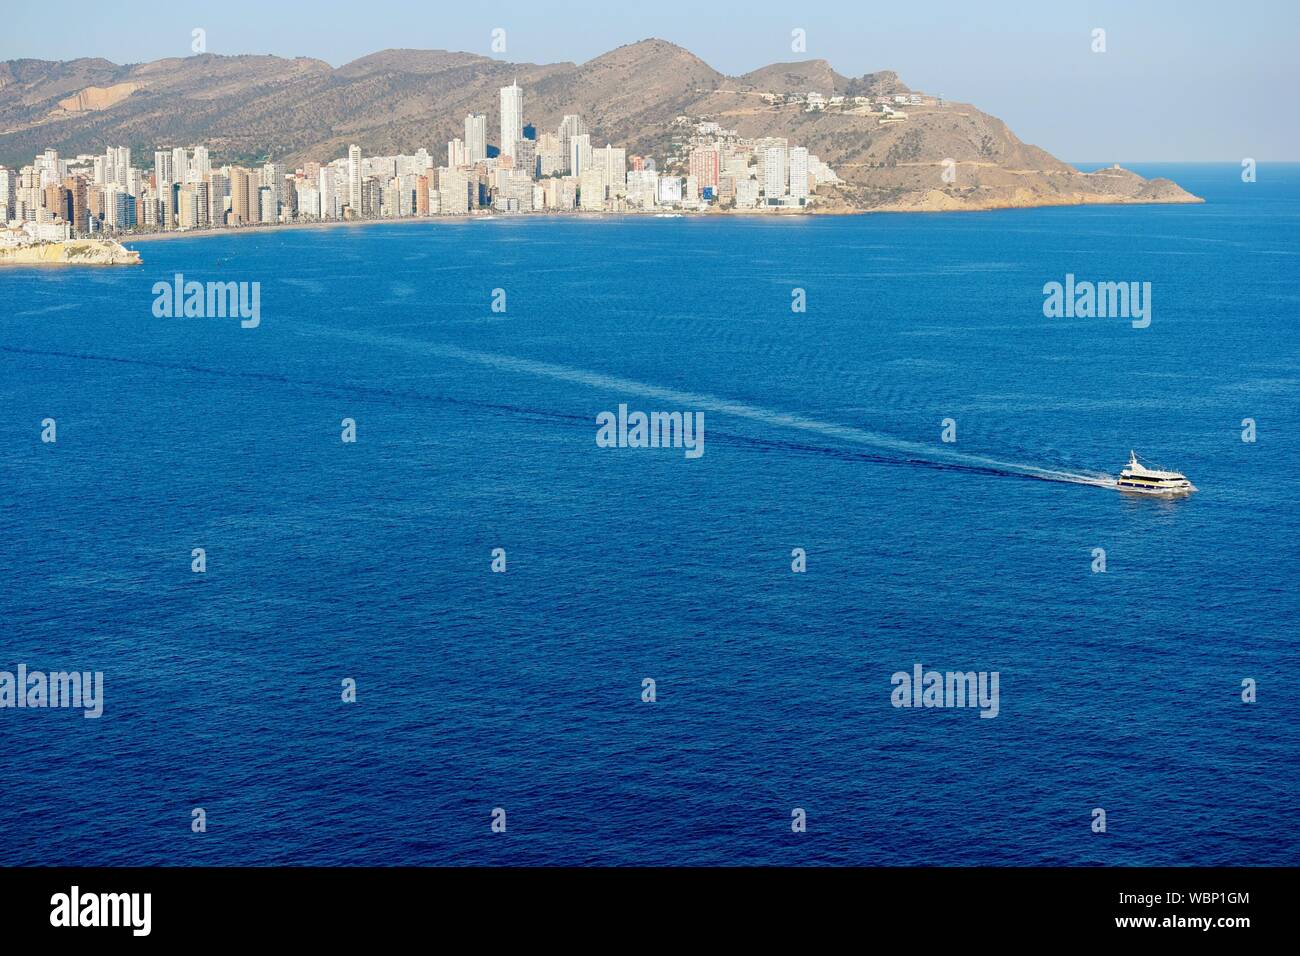 Boat In Sea With City And Hills In Background Stock Photo